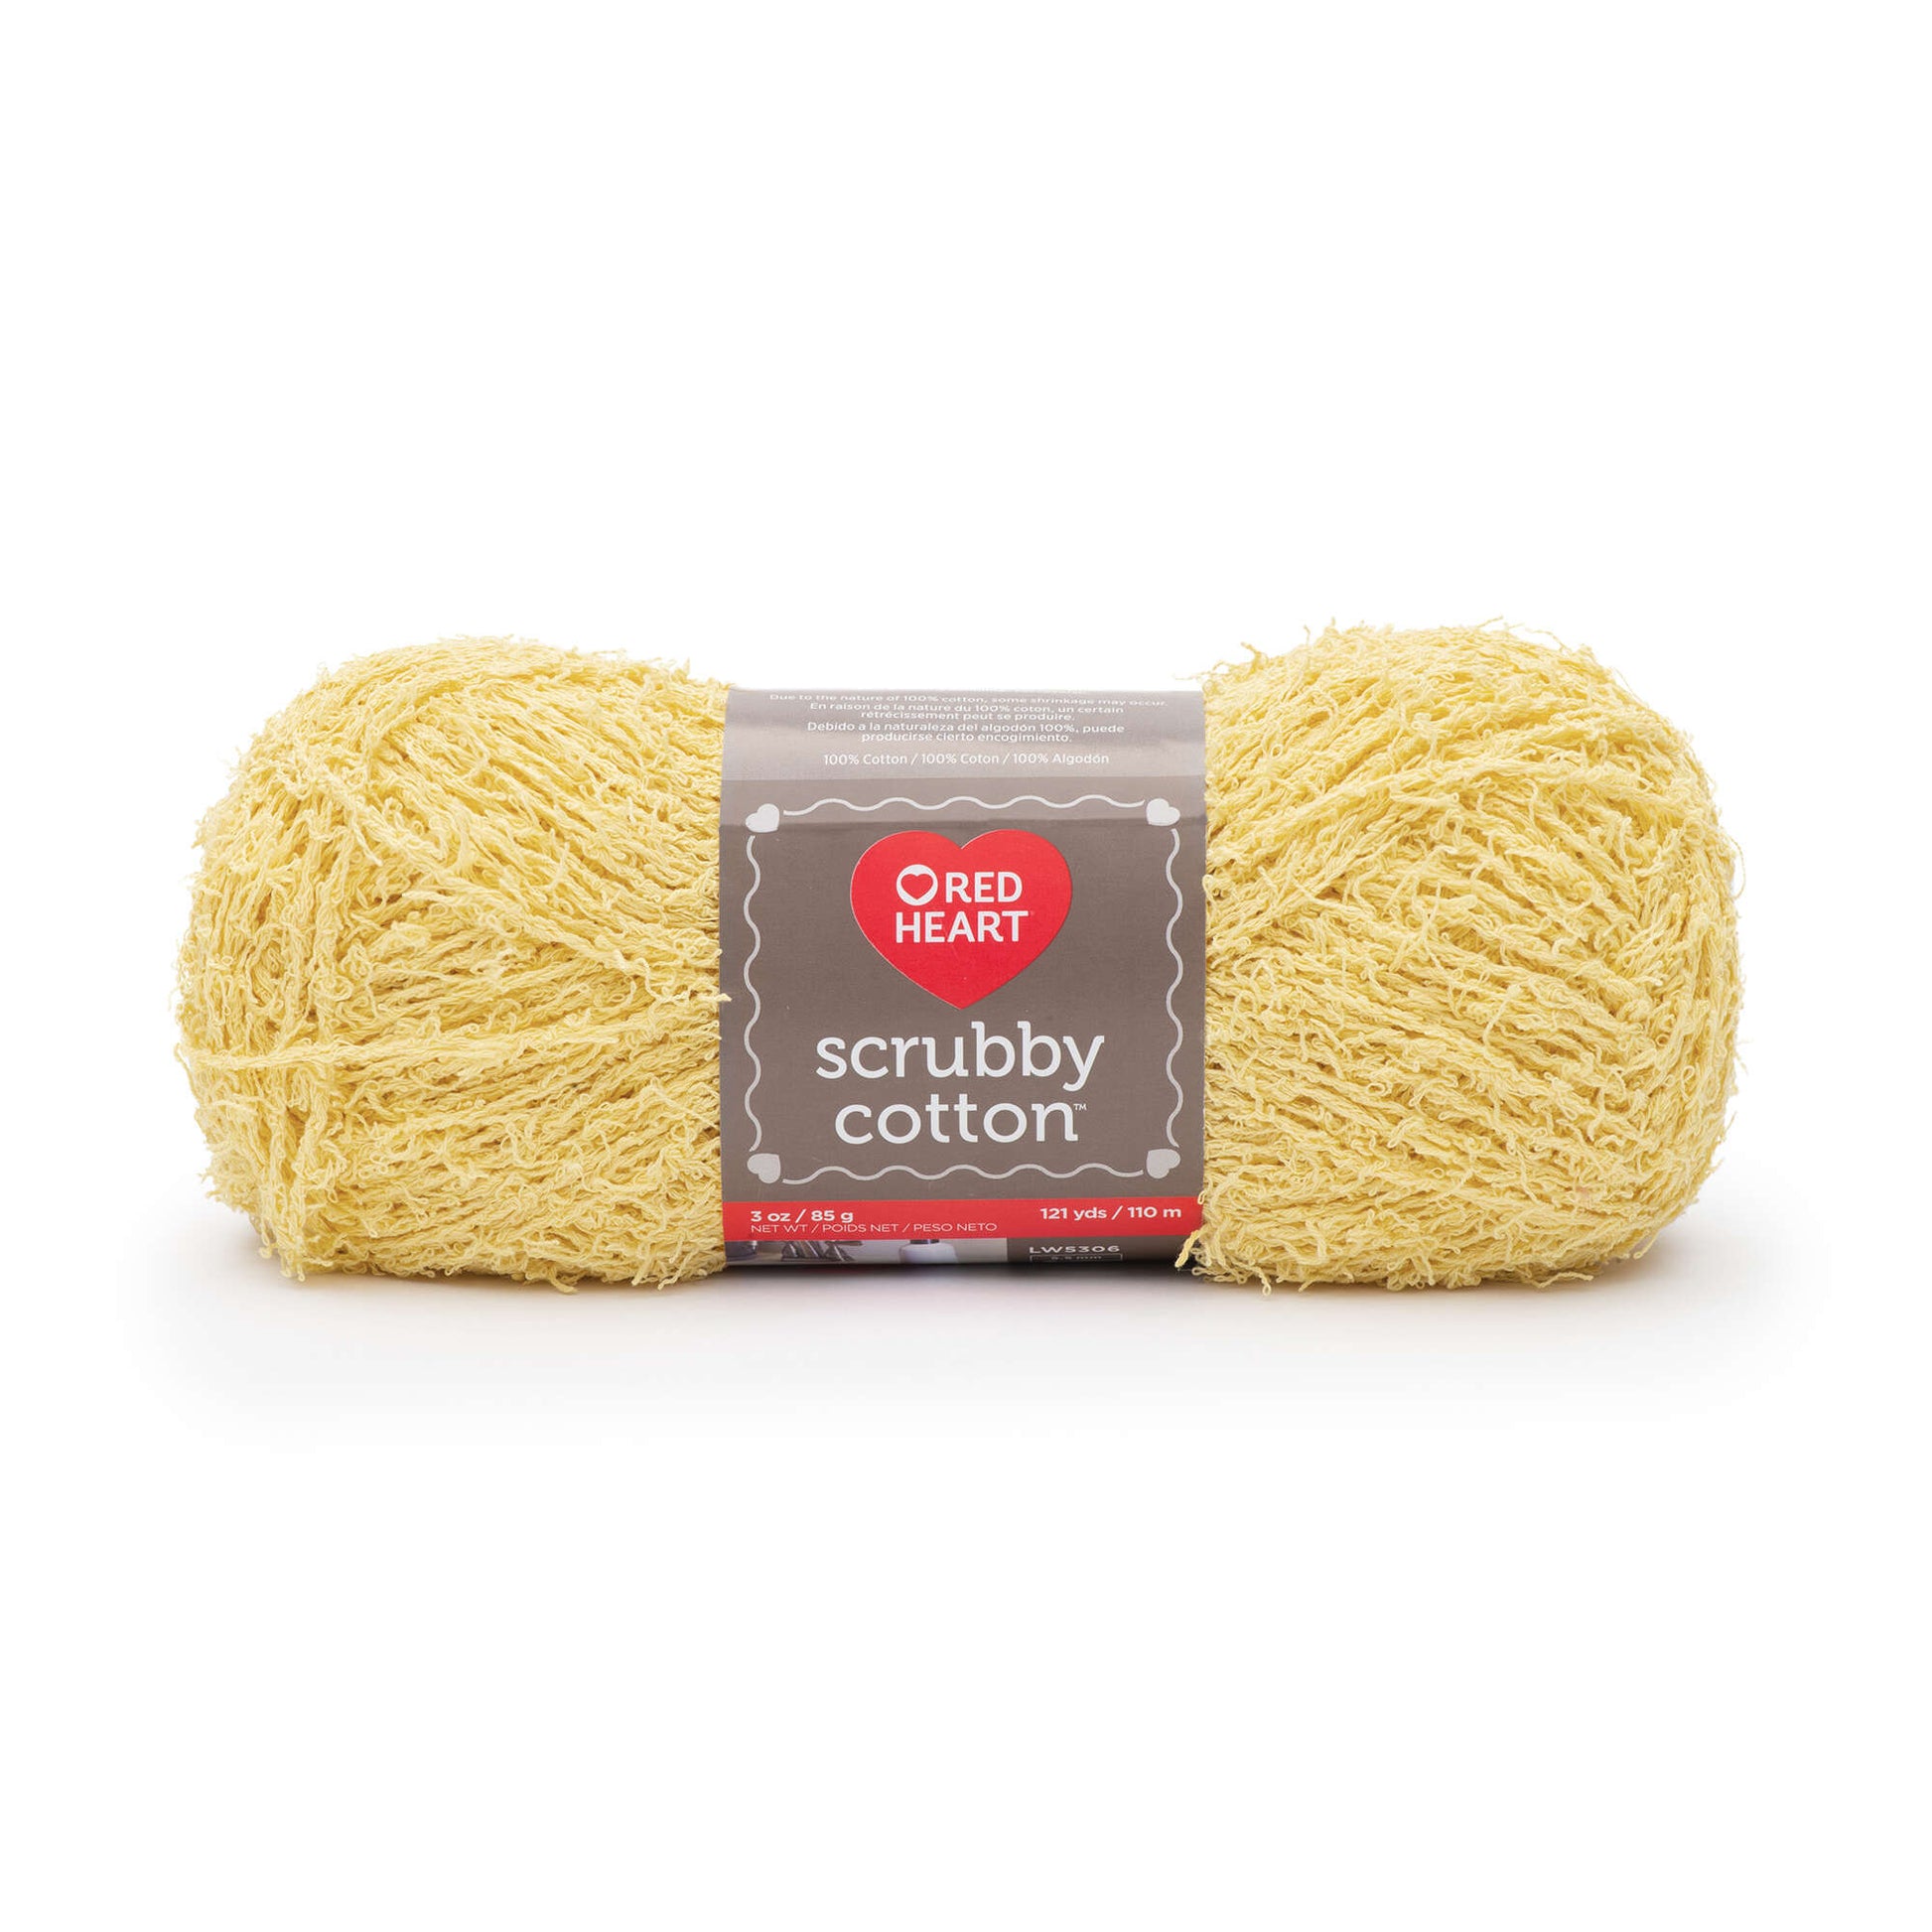 Red Heart Scrubby Cotton Yarn - Discontinued shades Lemony